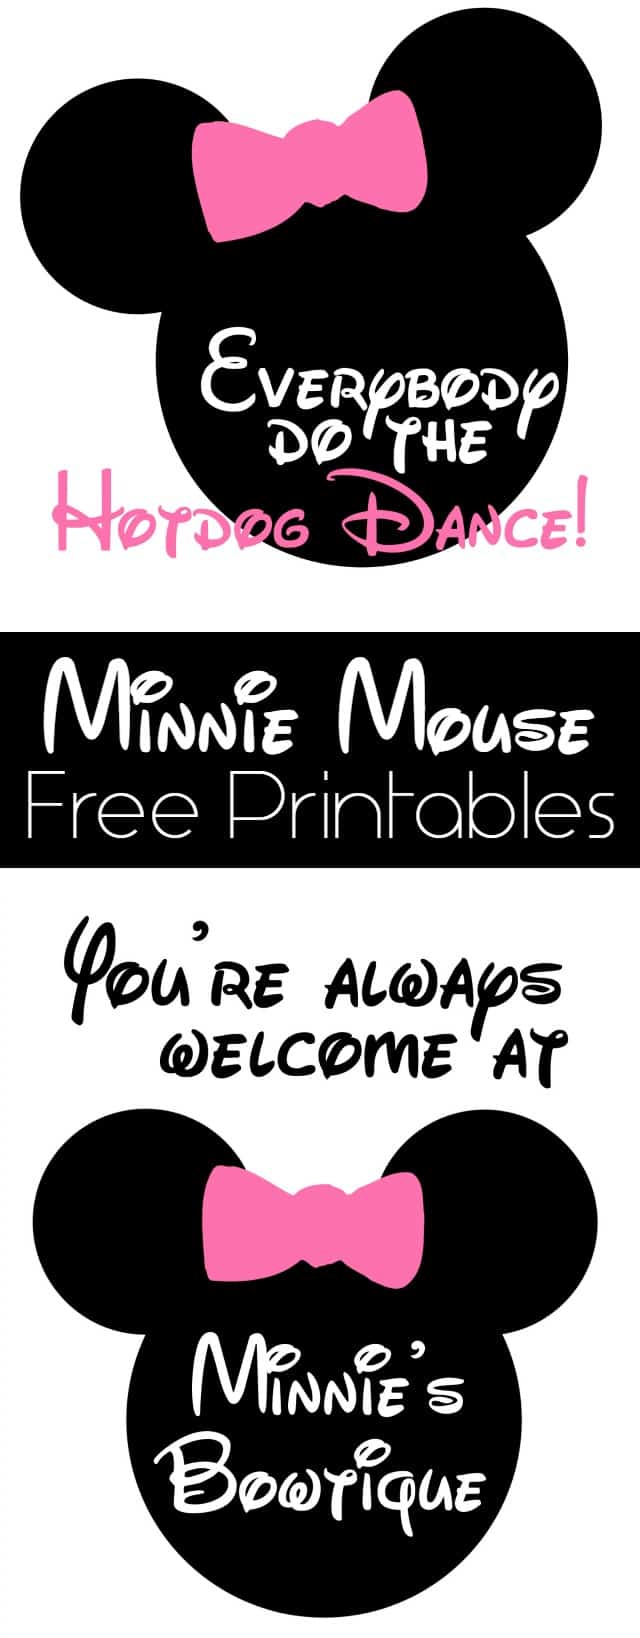 Minnie Mouse Free Printables on www.girllovesglam.com